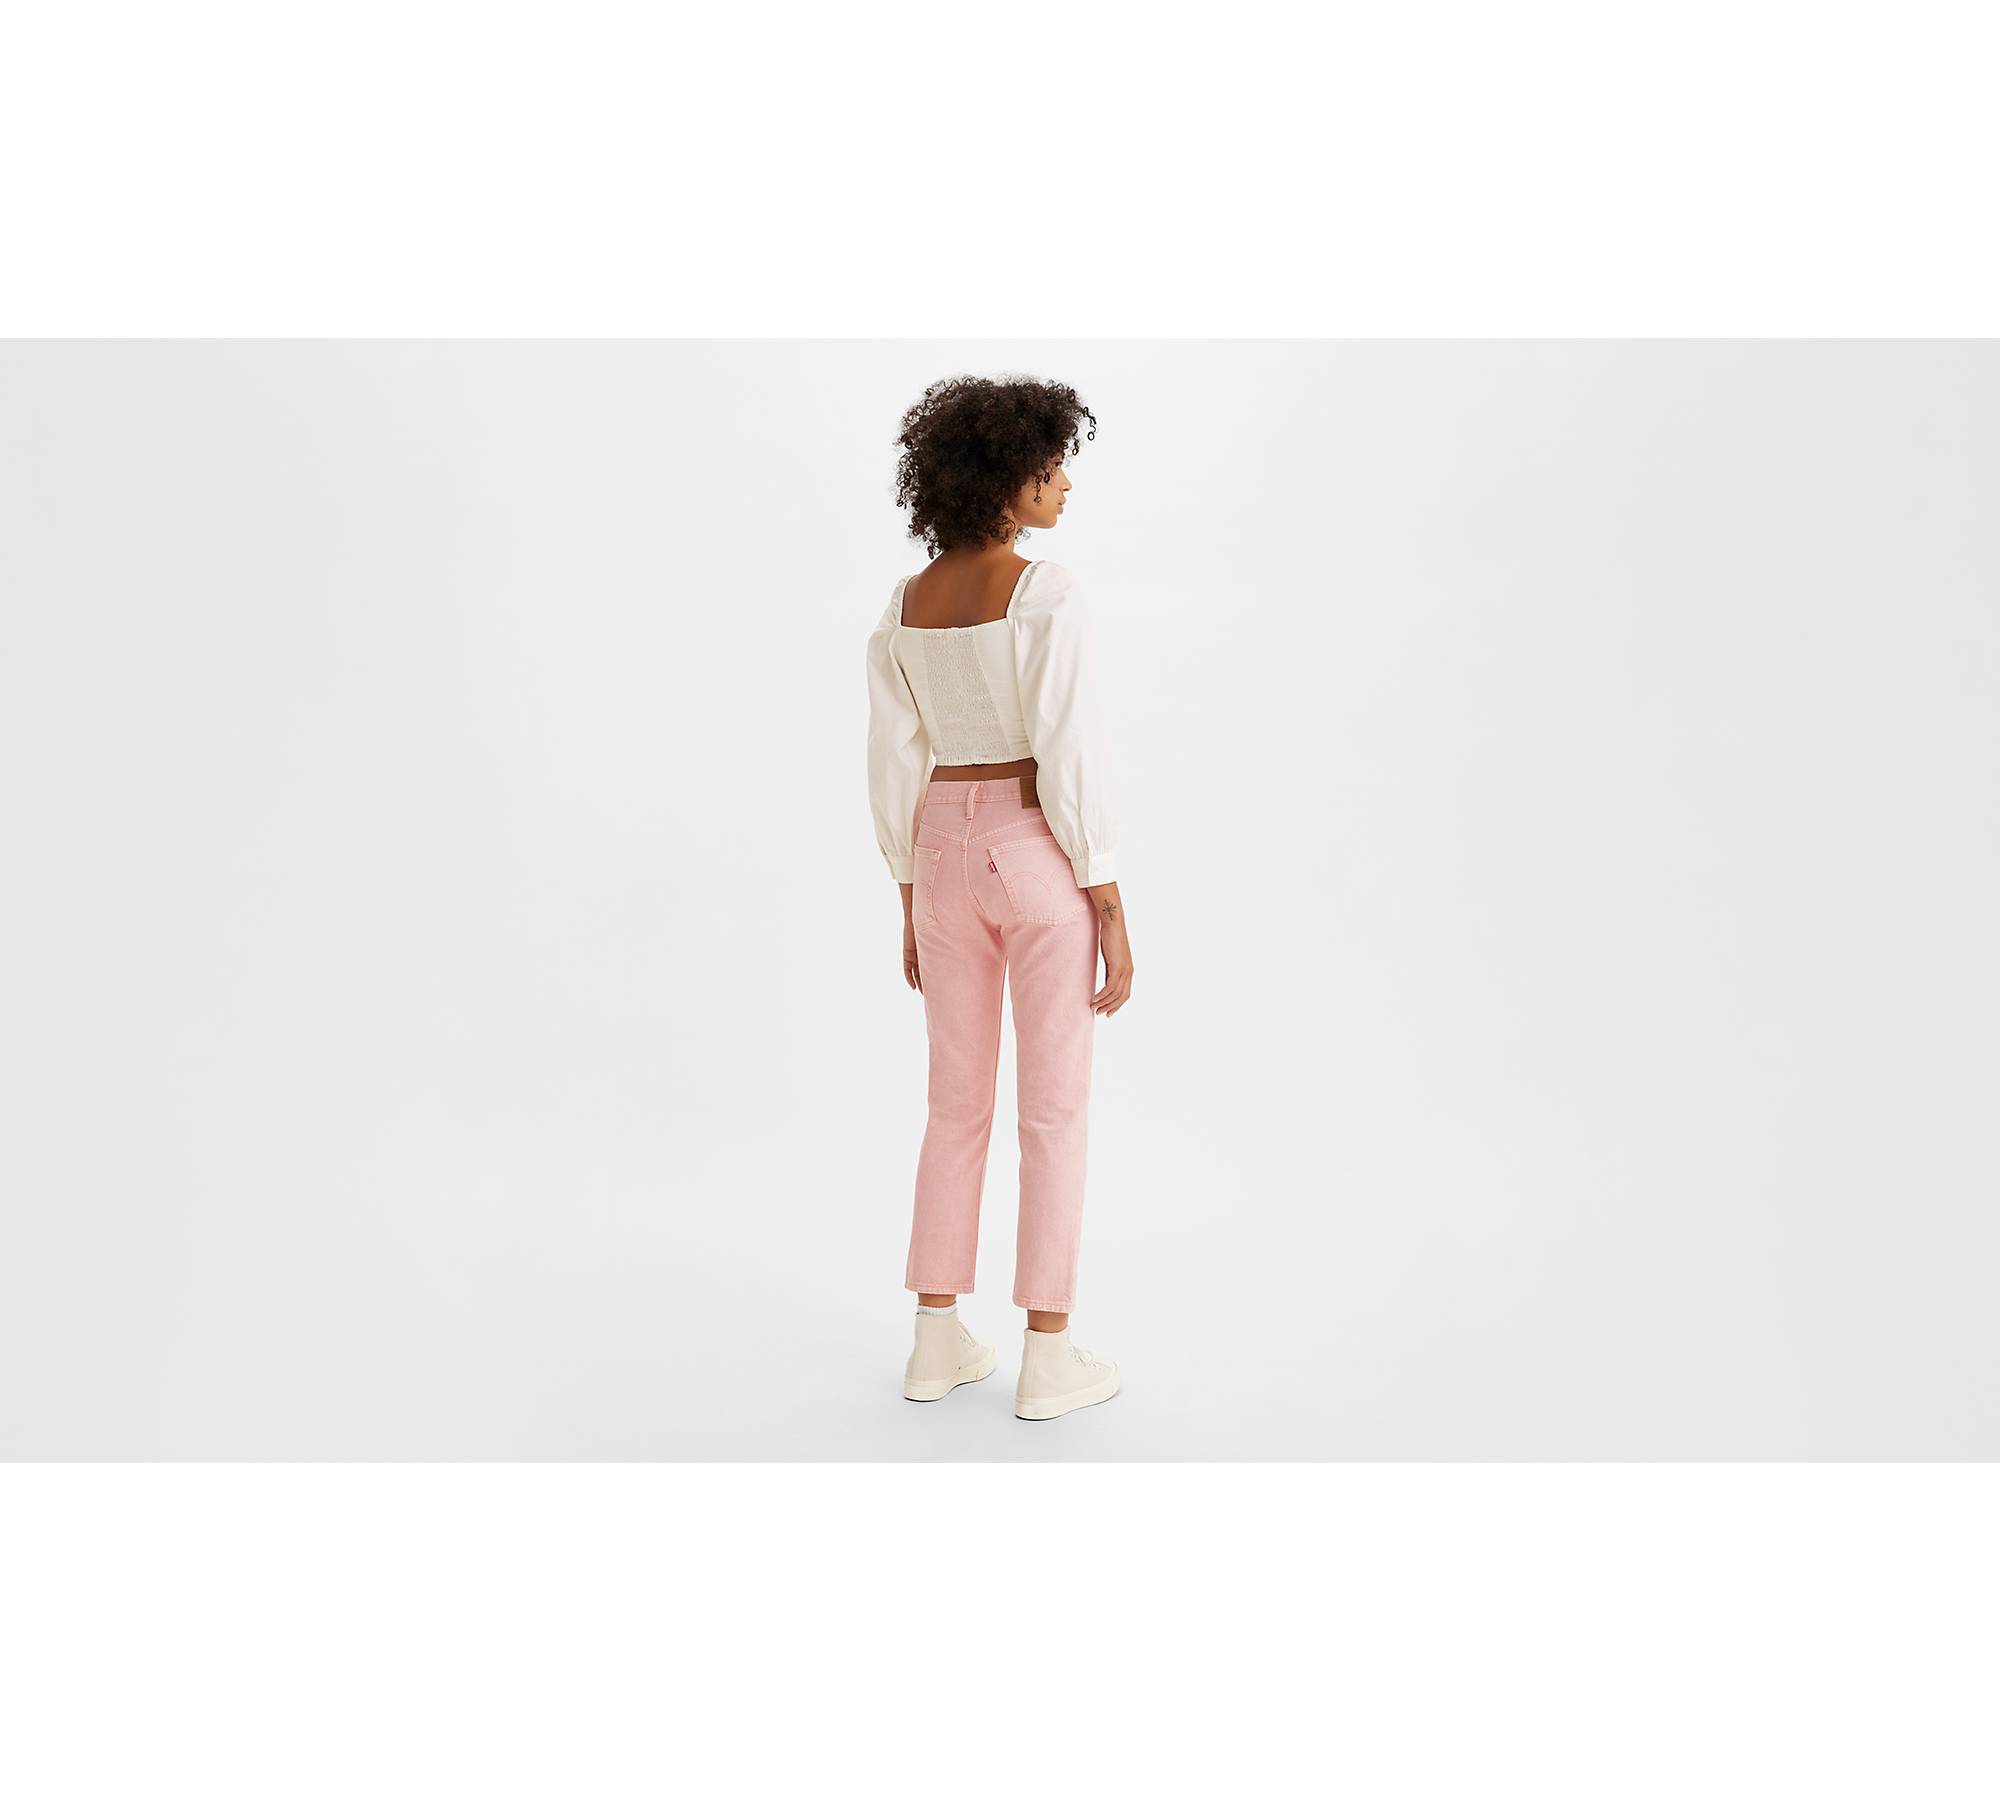 Pink Jeans For Women